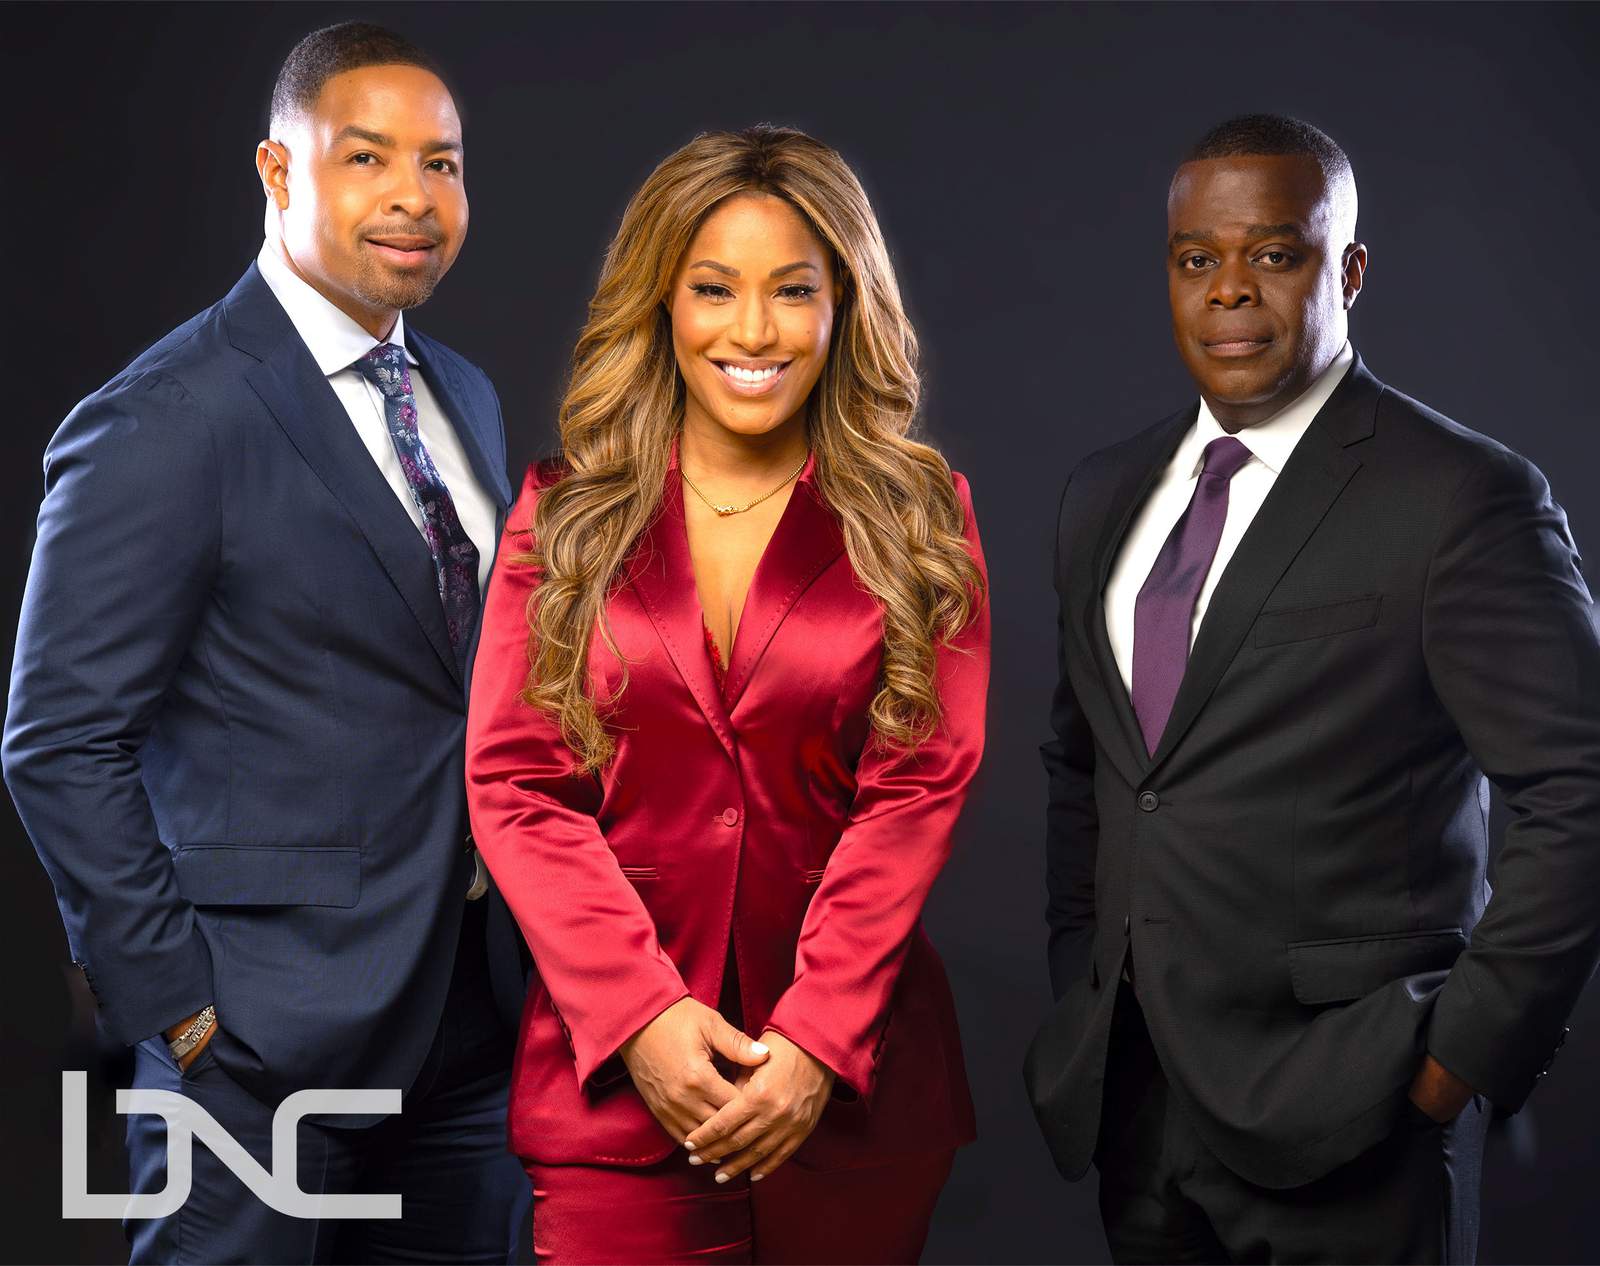 Black News Channel reloads with talk focus, morning show